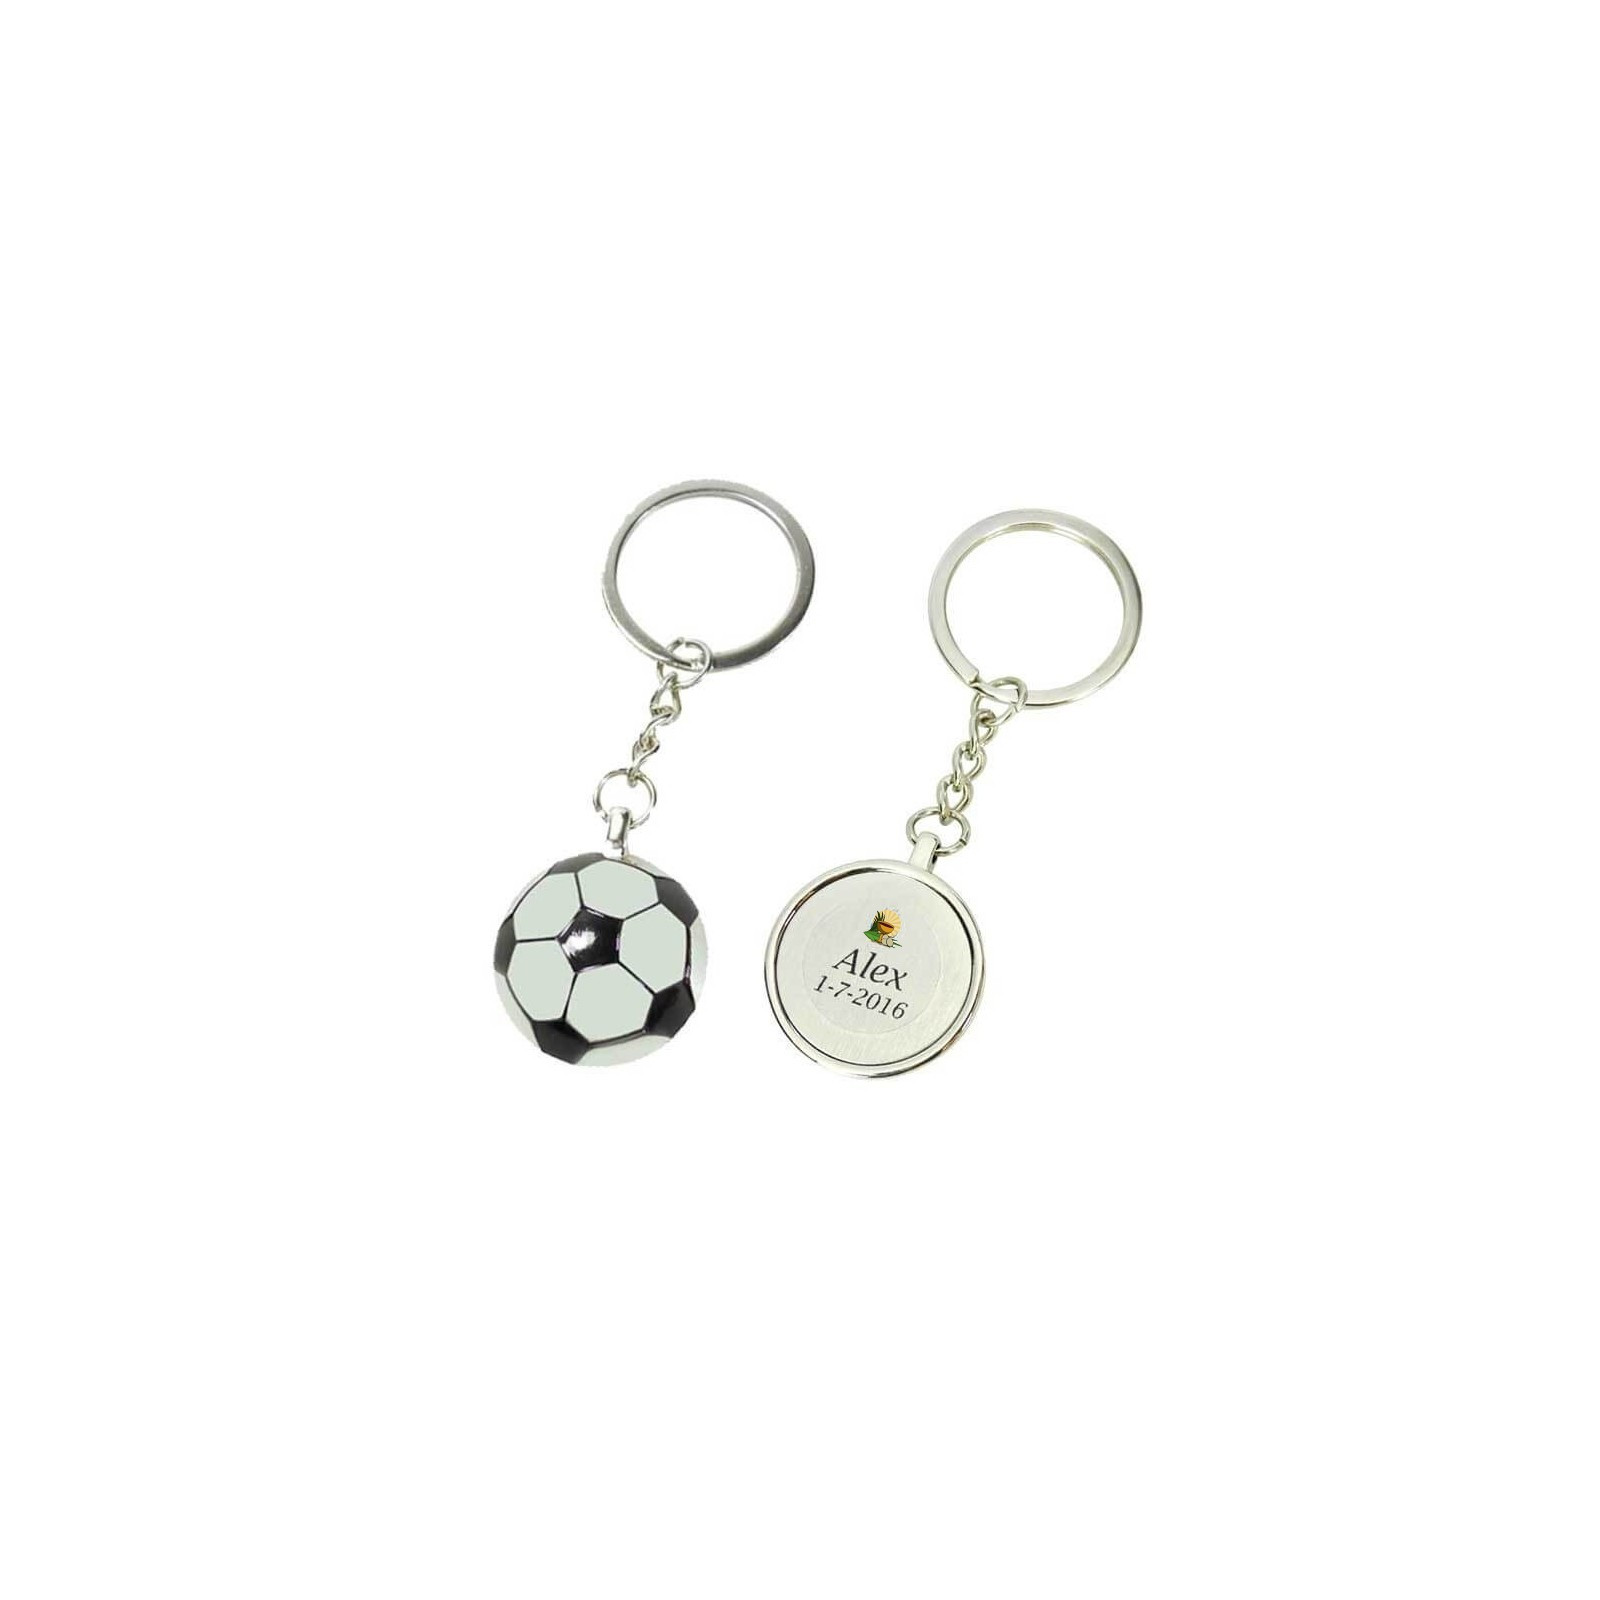 Porte cle personnalise foot